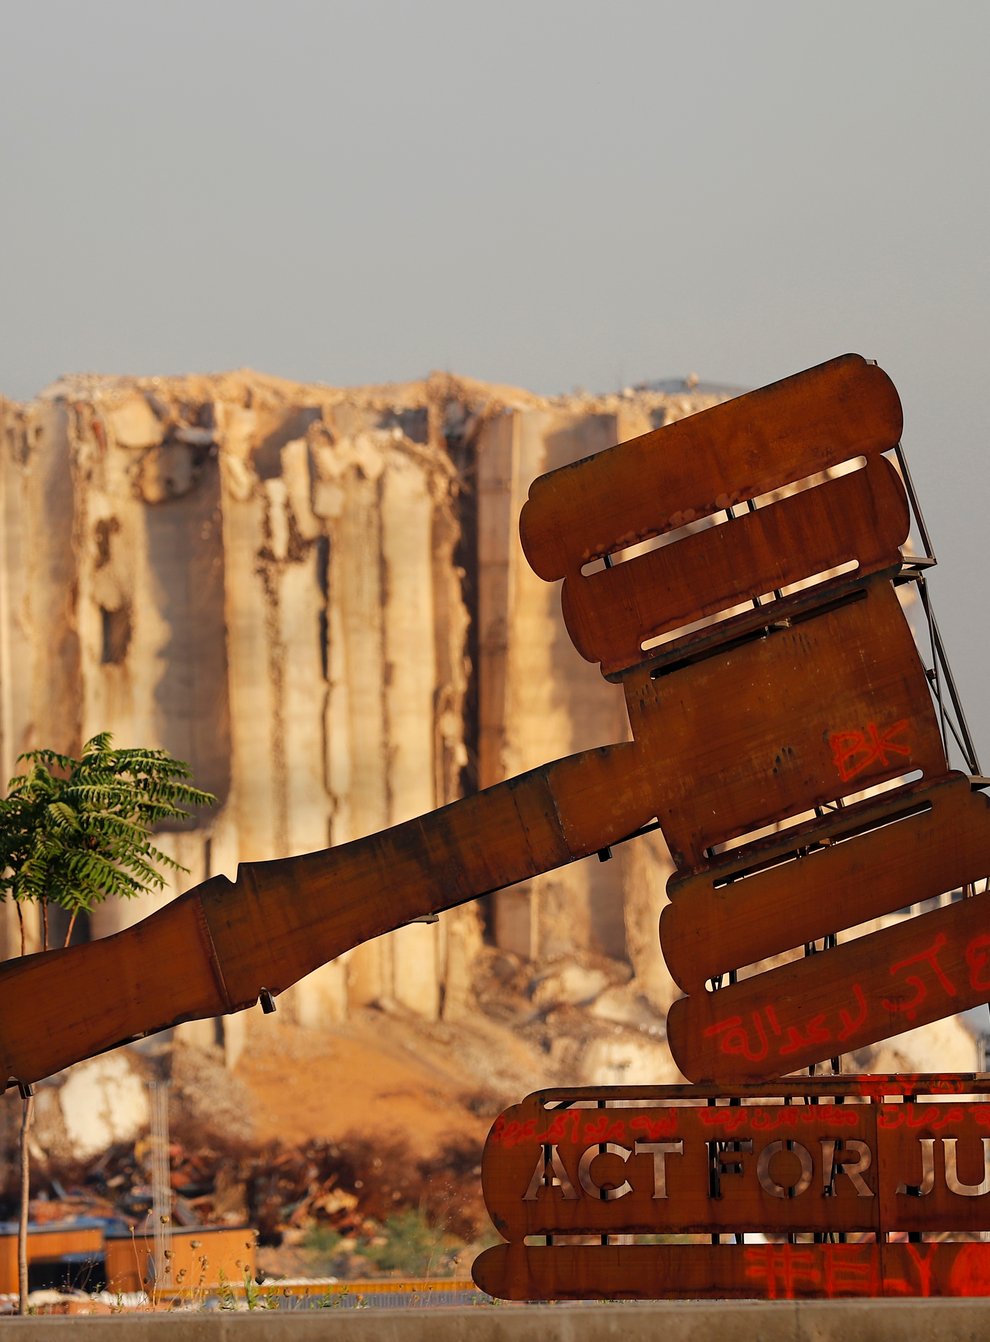 A justice symbol monument is seen in front of towering grain silos that were gutted in the massive August 2020 explosion at the port that claimed the lives of more than 200 people, in Beirut, Lebanon (Hussein Malla/AP)